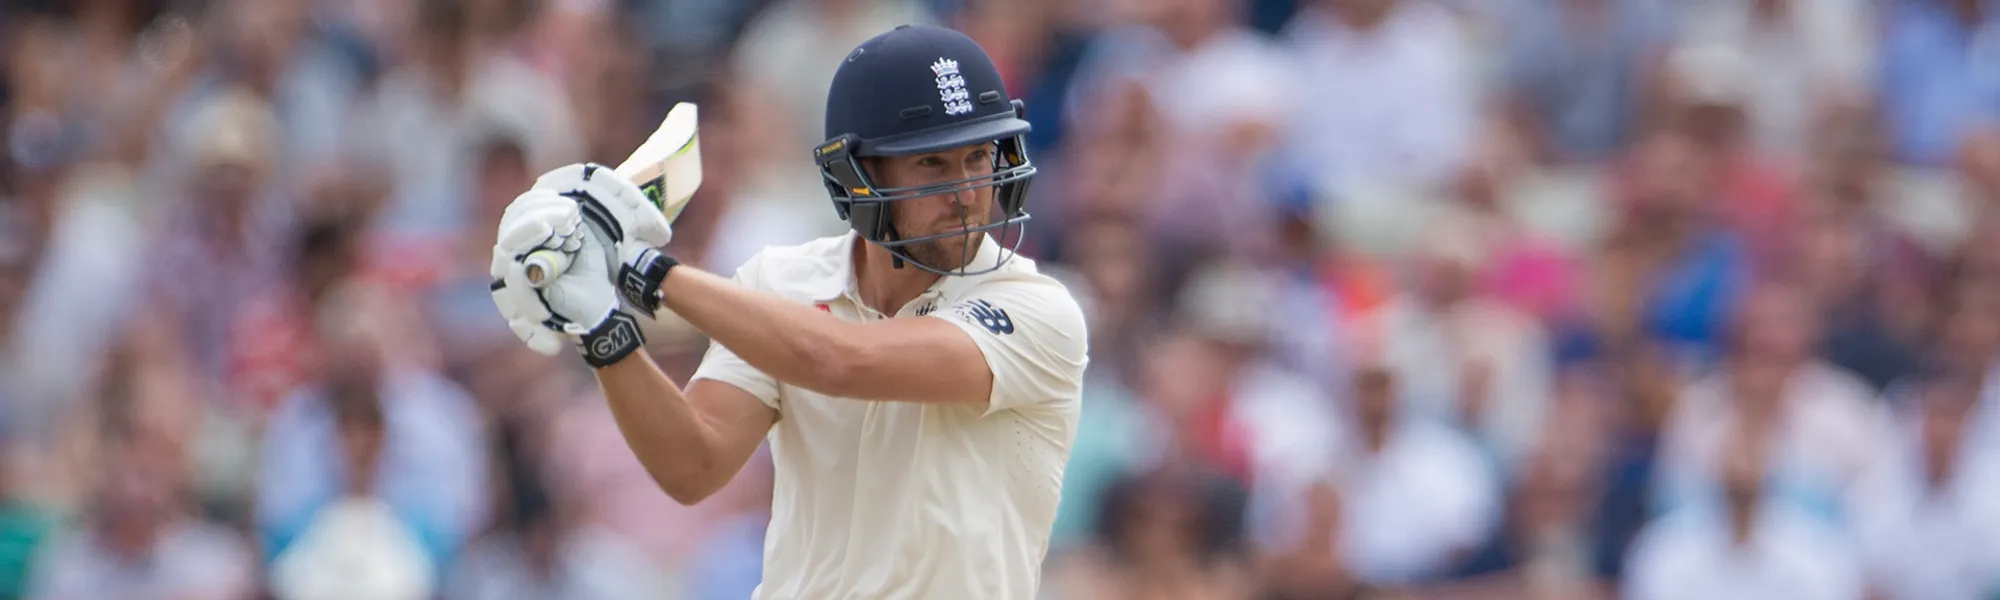 Ashes 2021-22 | England hurting after two defeats, everyone is up for the challenge, says Dawid Malan